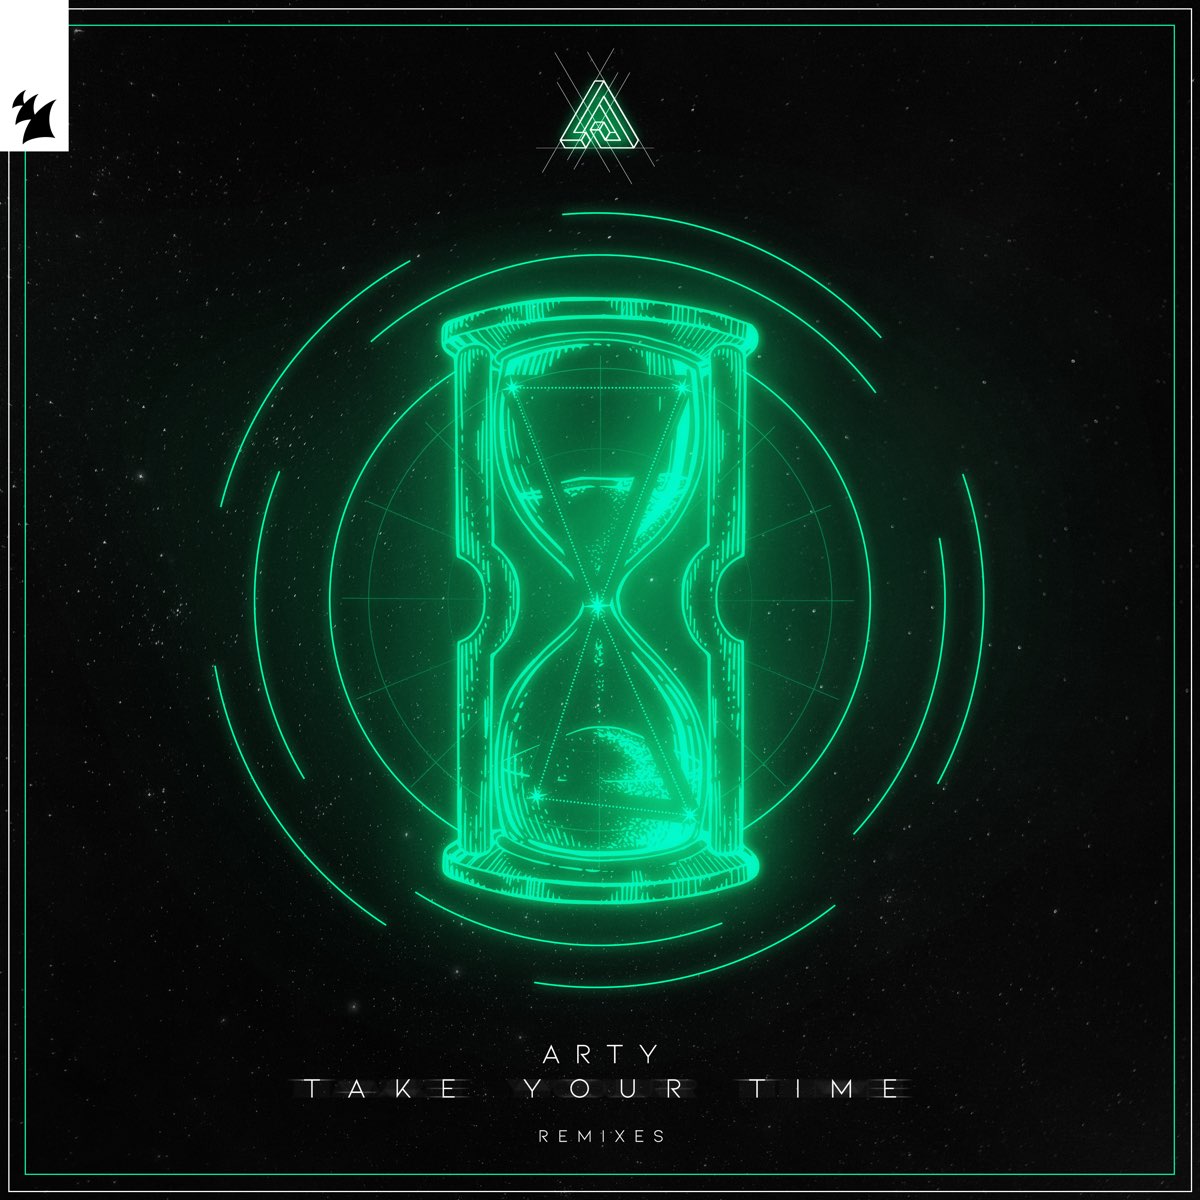 ARTY Take Your Time (Remixes) cover artwork